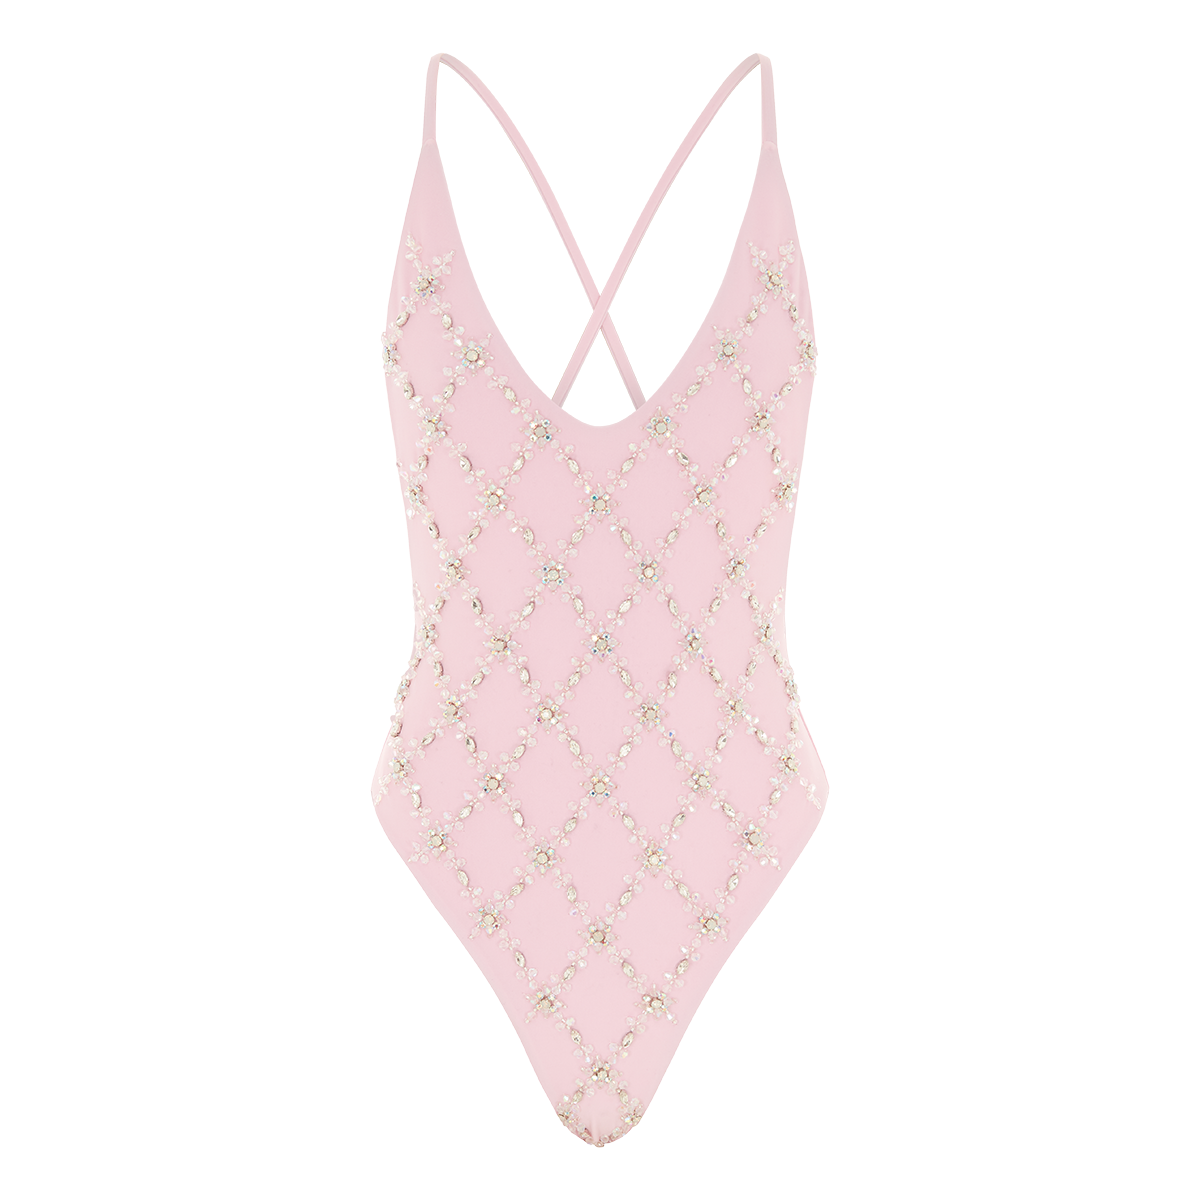 crystal embellished one piece swimsuit